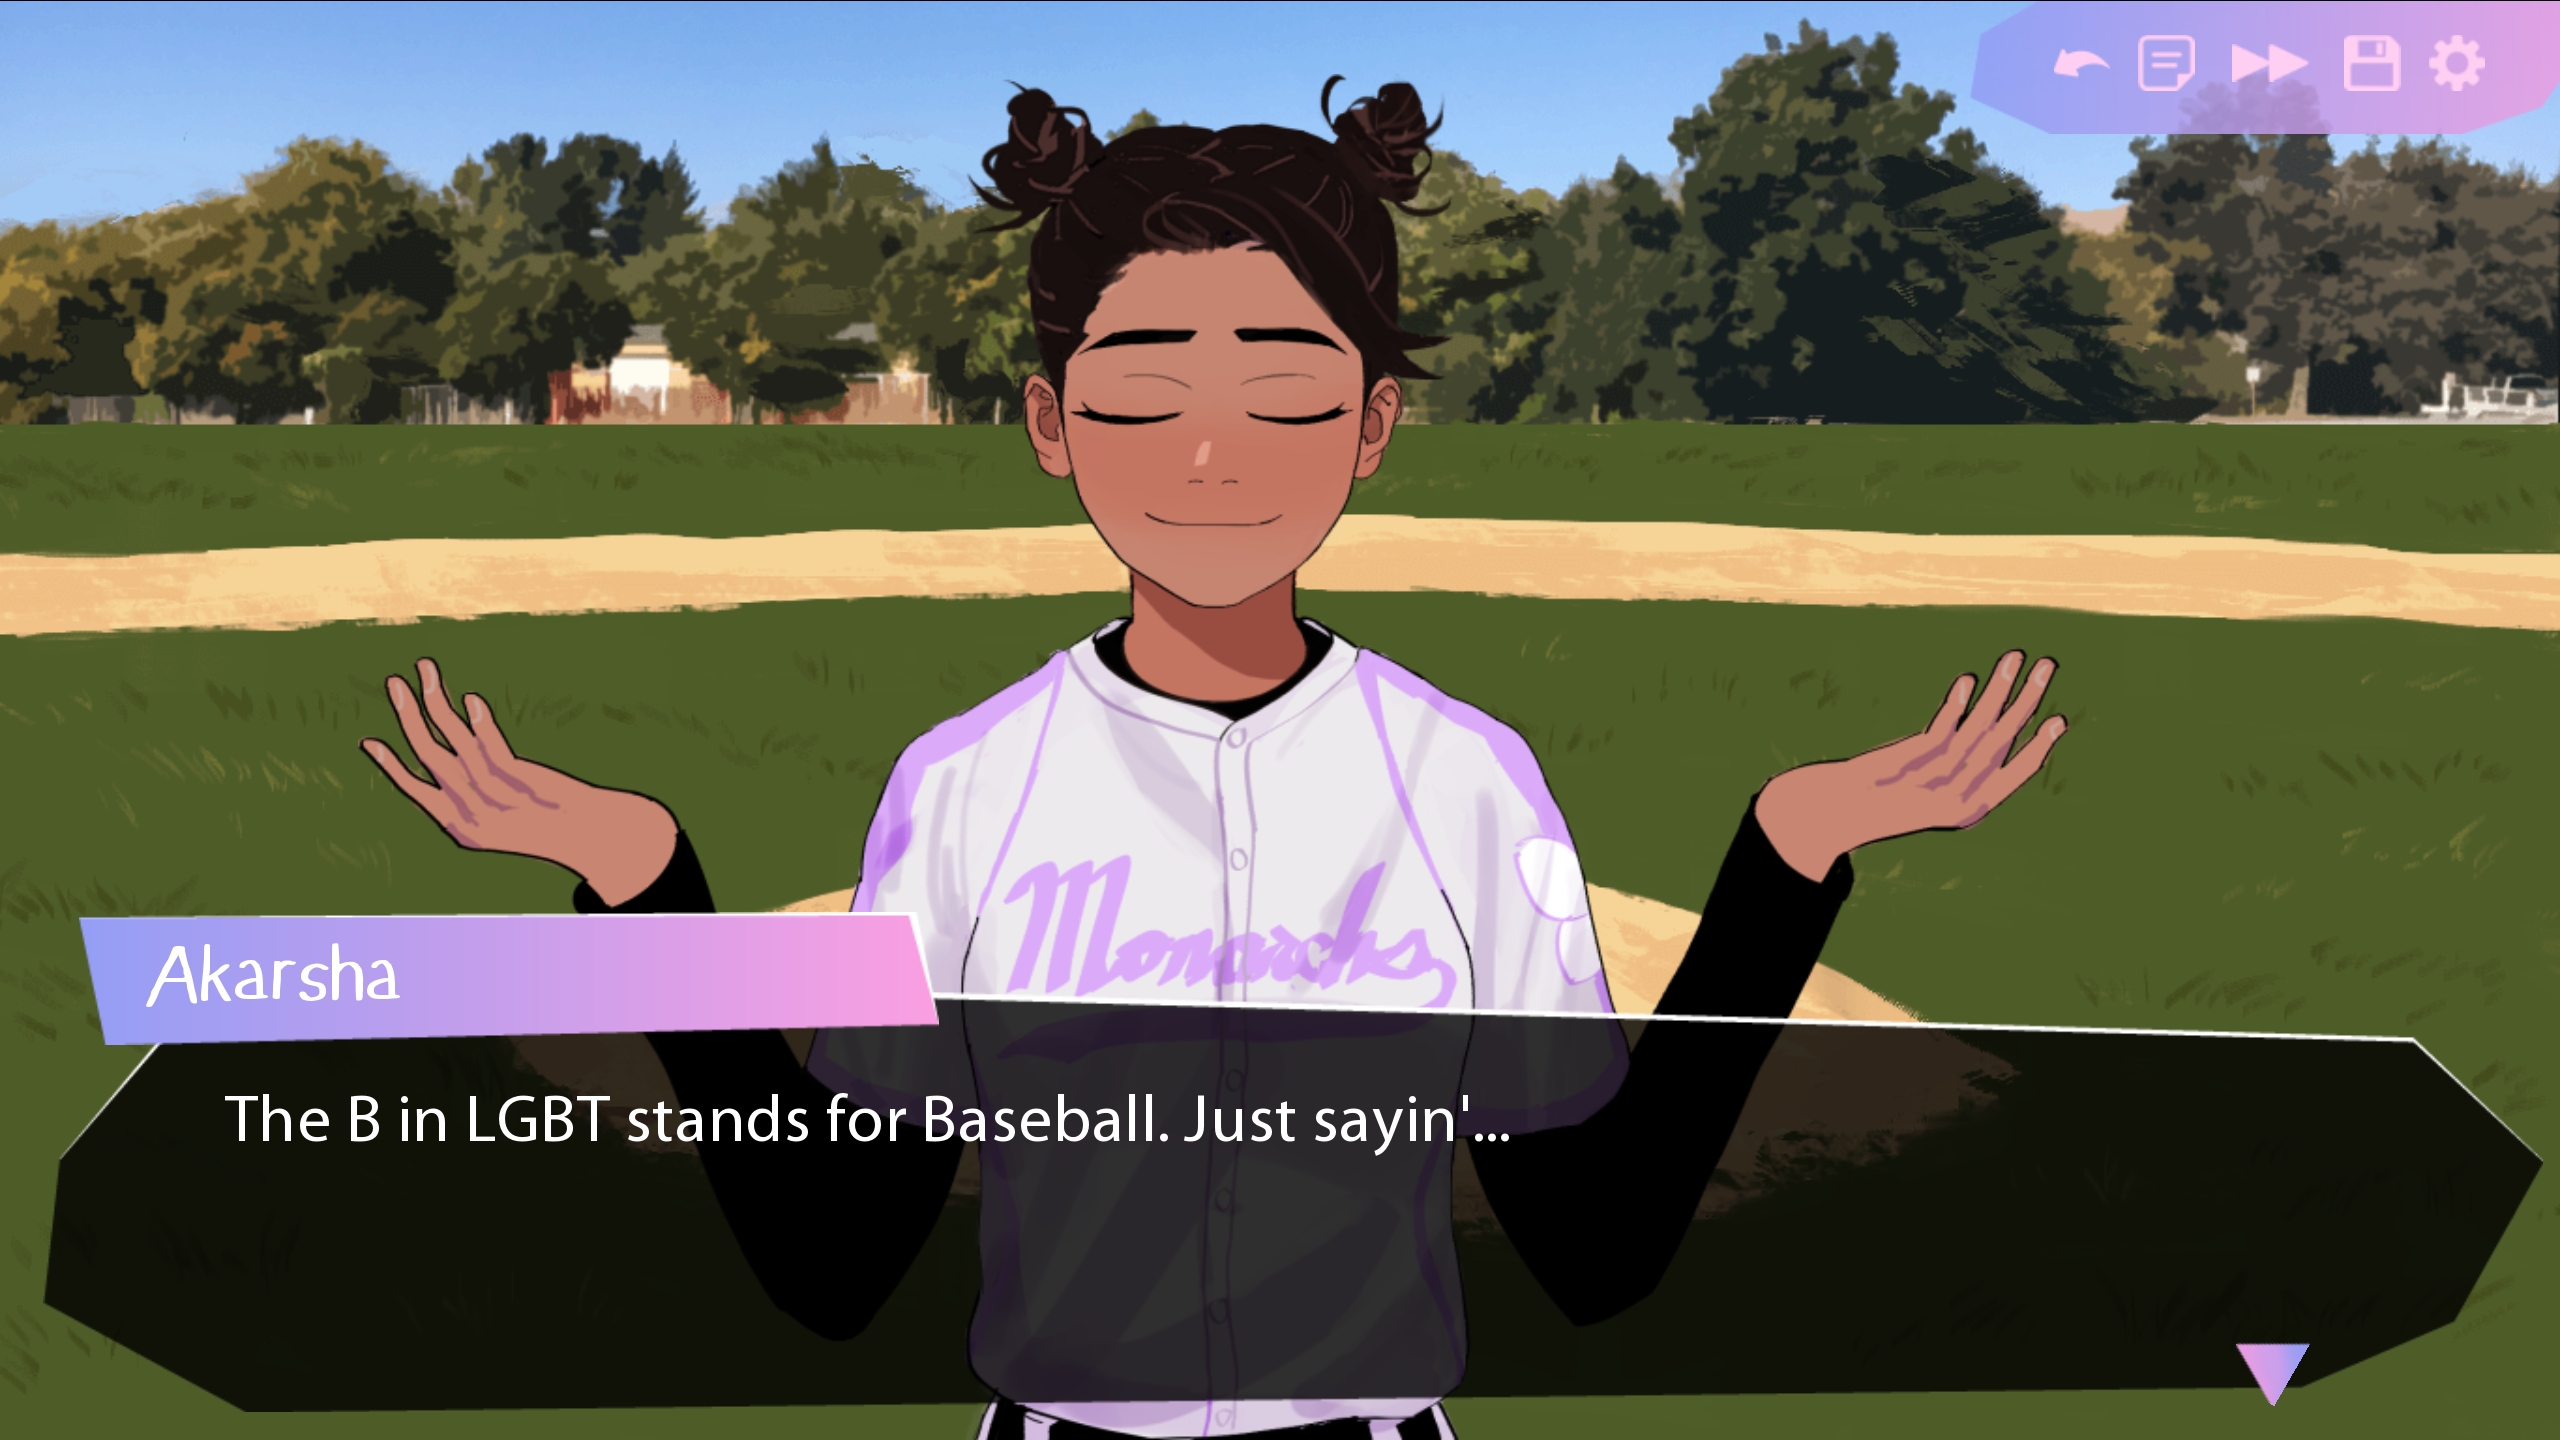 A girl in a baseball uniform explains the B in LGBT stands for baseball